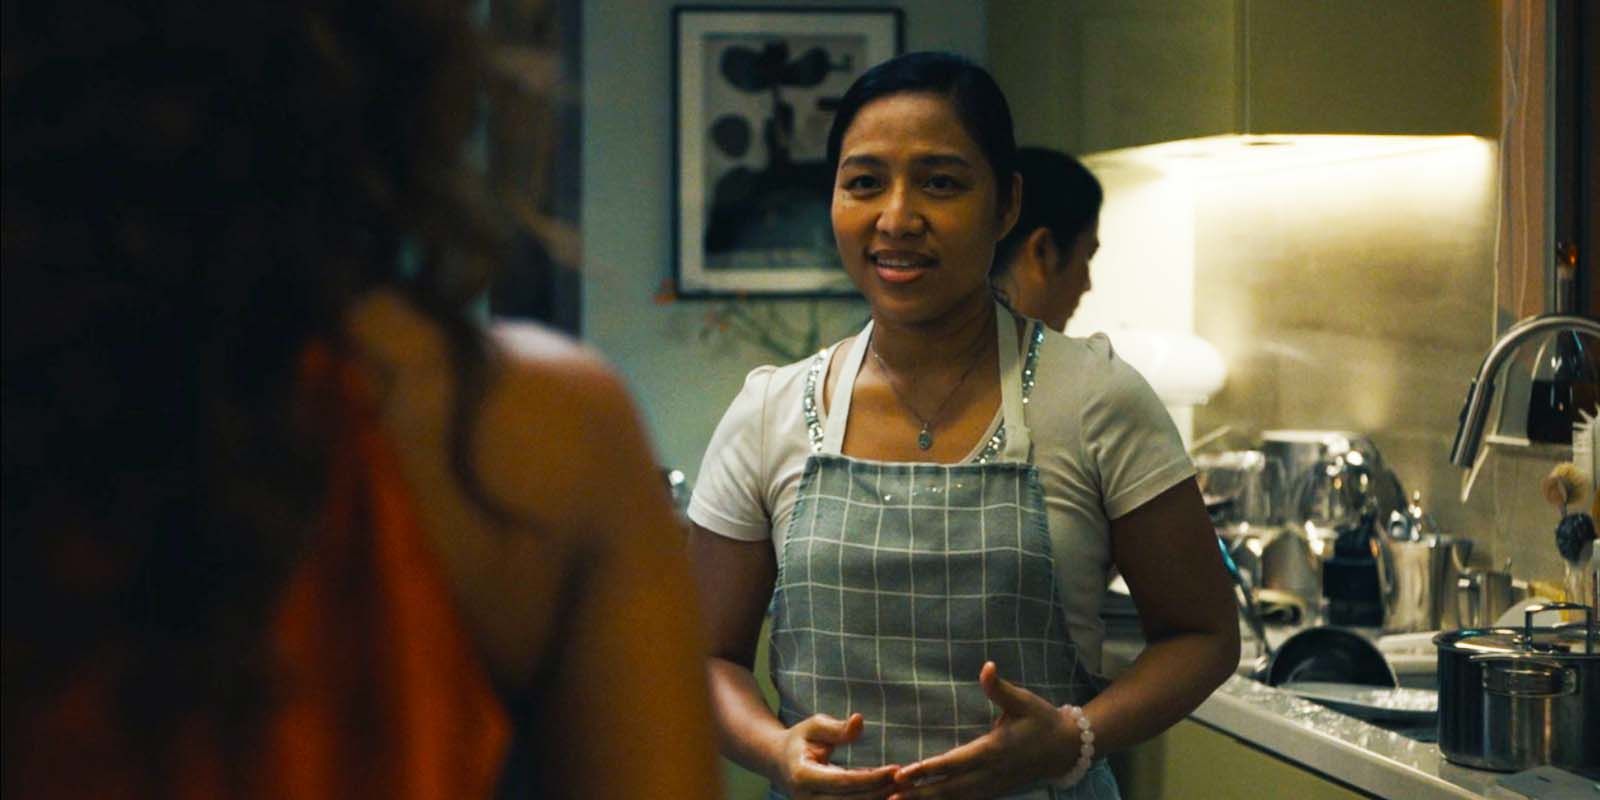 Sarayu Blue as Hilary Starr and Amelyn Pardenilla as Puri in Expats episode 3